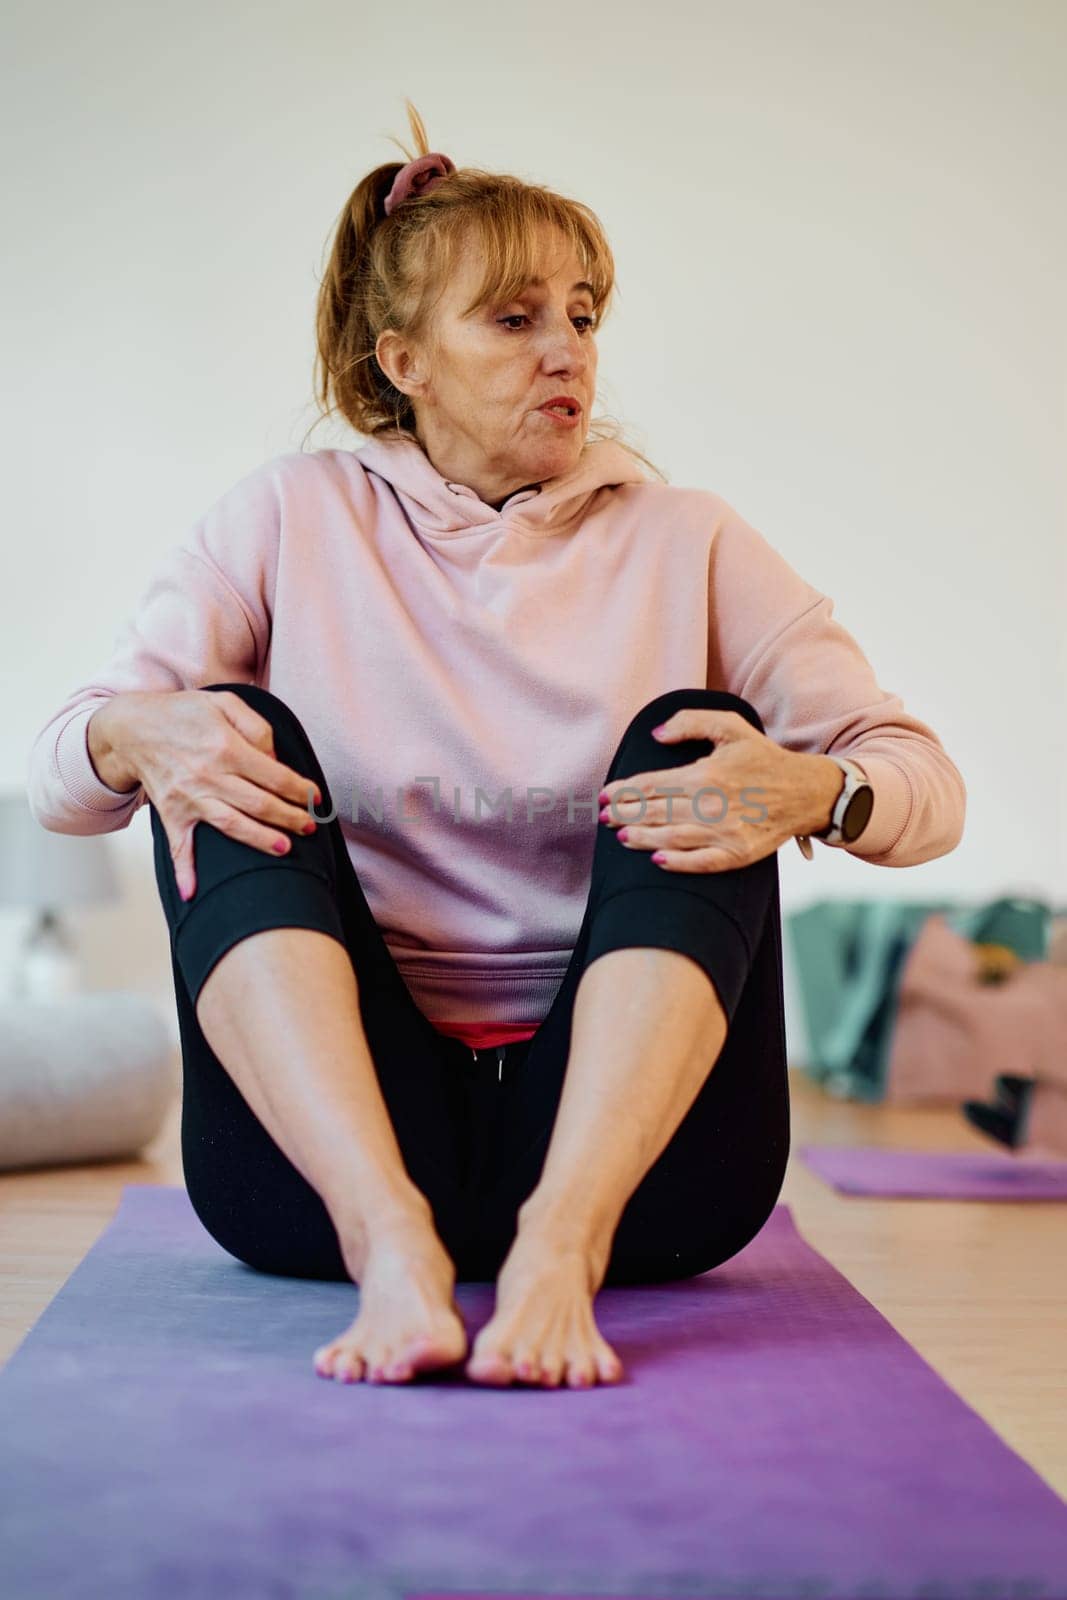 In a sunlit space, a senior woman gracefully practices rejuvenating yoga, focusing on neck, back, and leg stretches, embodying serenity and well-being by dotshock